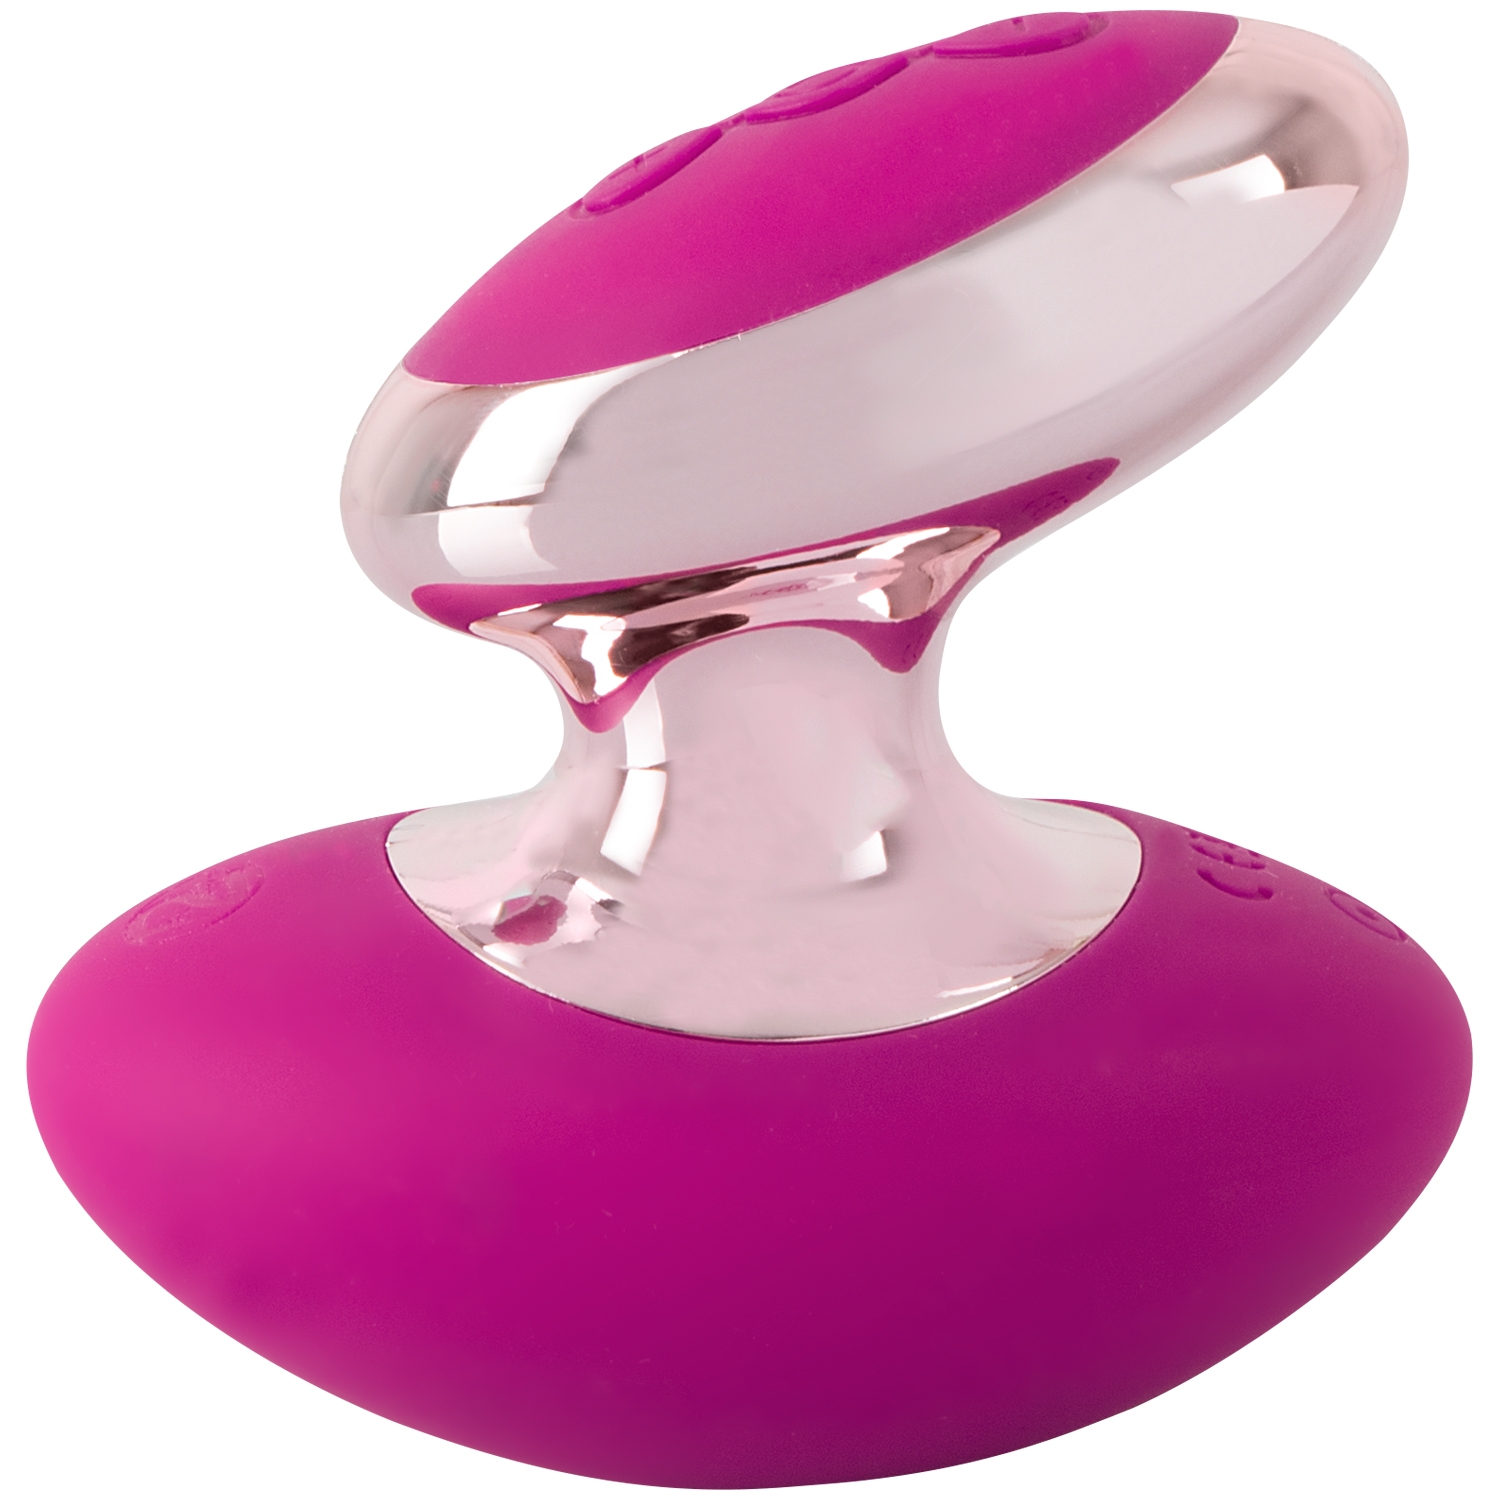 You2Toys Couples Choice Massager       - Pink